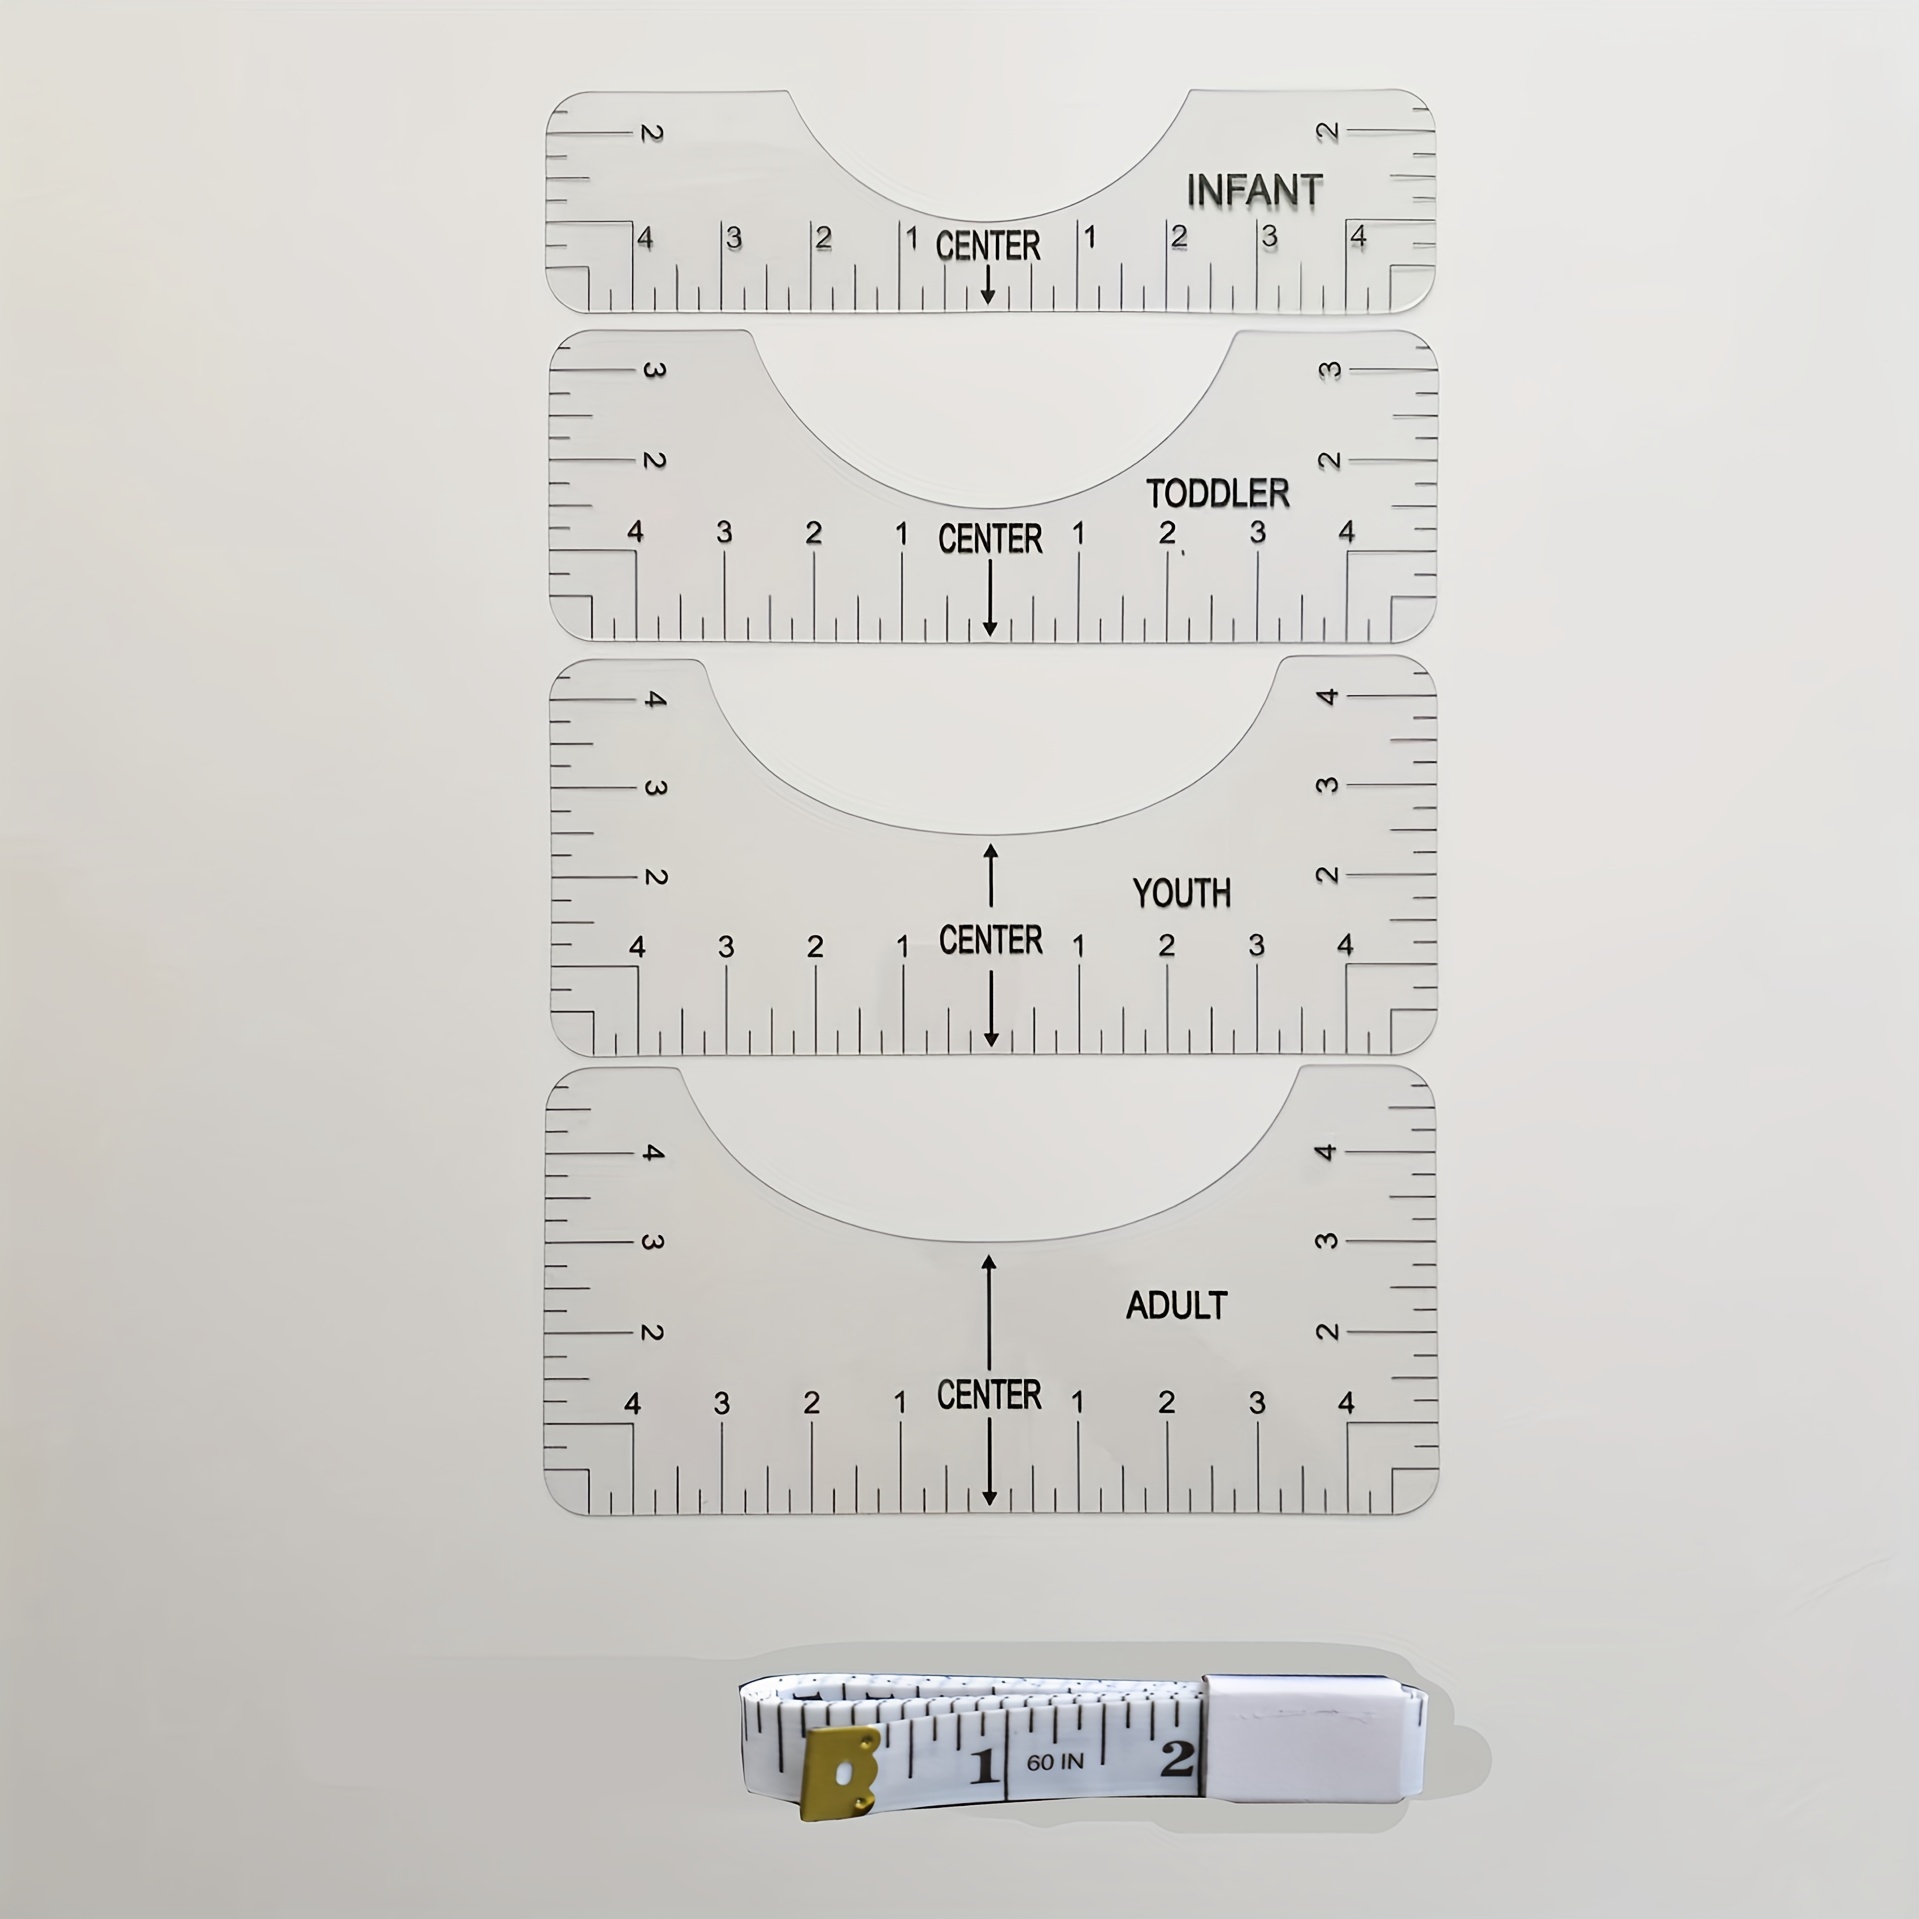 Upgraded Acrylic T-shirt Ruler For Heat Press, T-shirt Measuring Ruler  Guide For Making Center Graphics Vinyl Embroidery T-shirt Ruler Alignment  Tool Placement Dye Sublimation Blank Product Accessories - Temu United Arab  Emirates